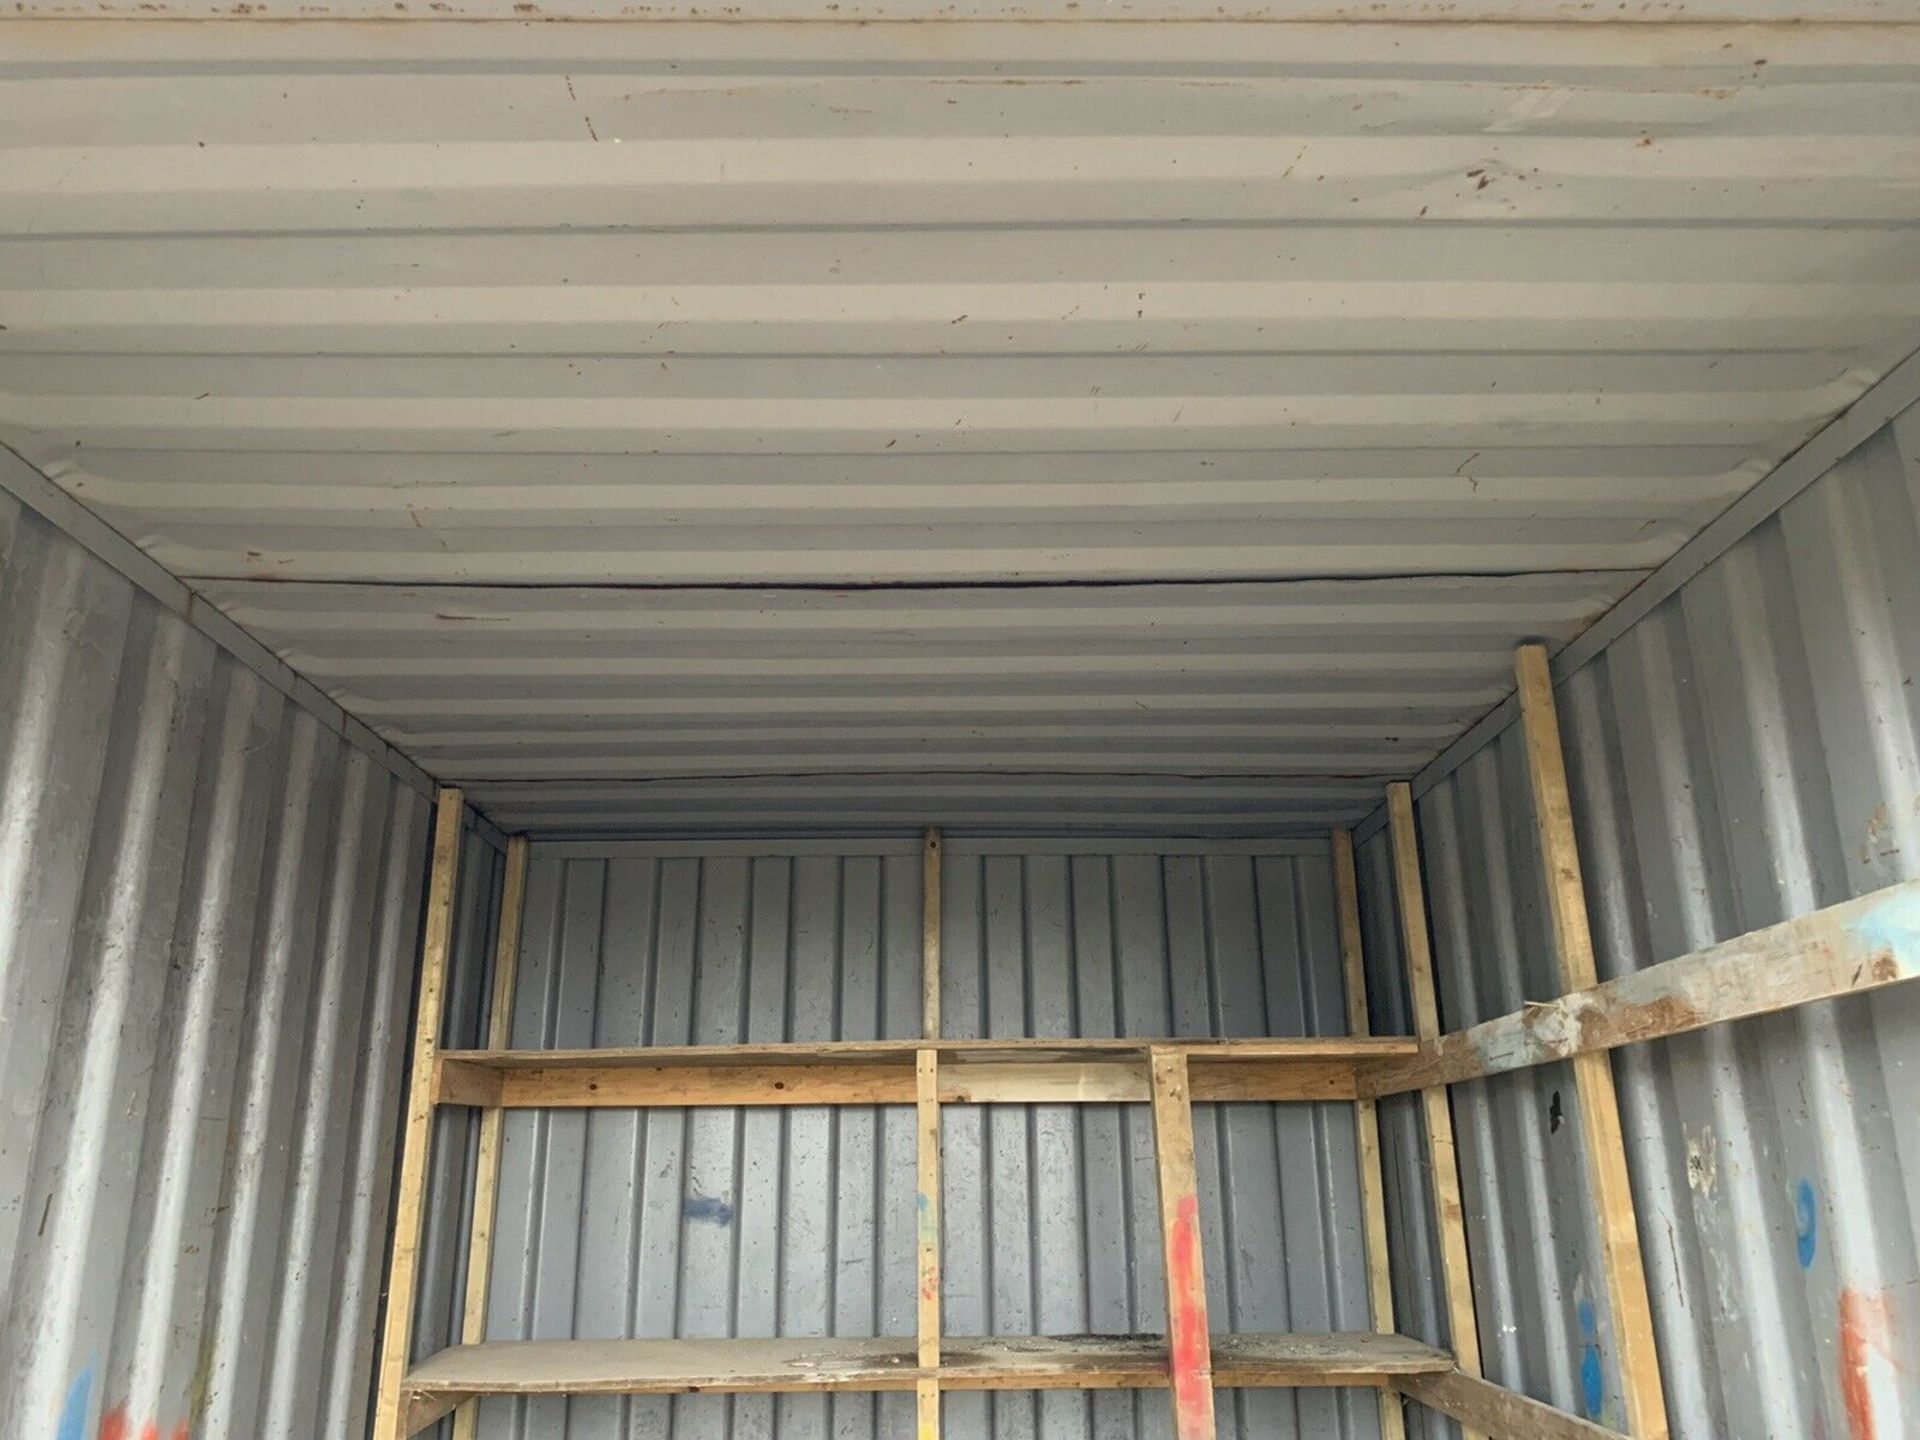 Office / Storage Container. Anti Vandal - Image 6 of 8